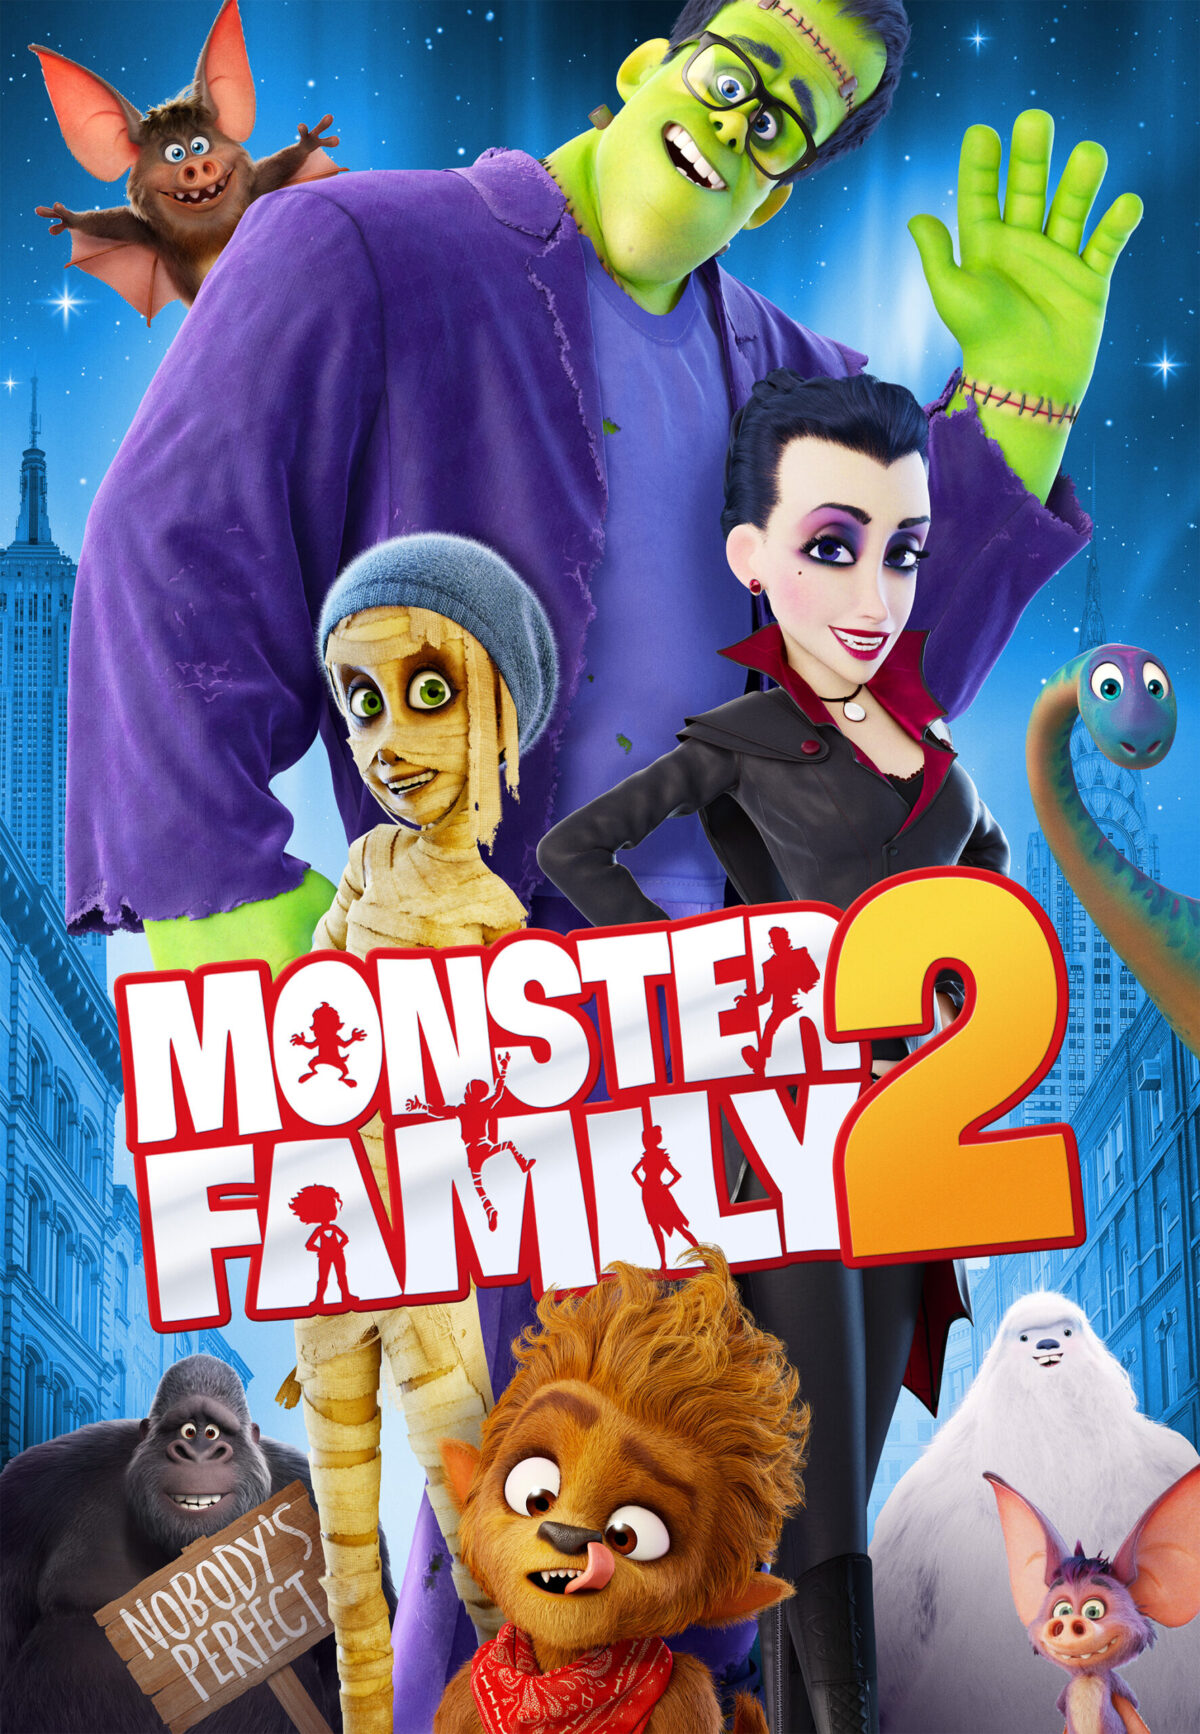 Fun Family Movie - Monster Family 2 - Powered By Mom